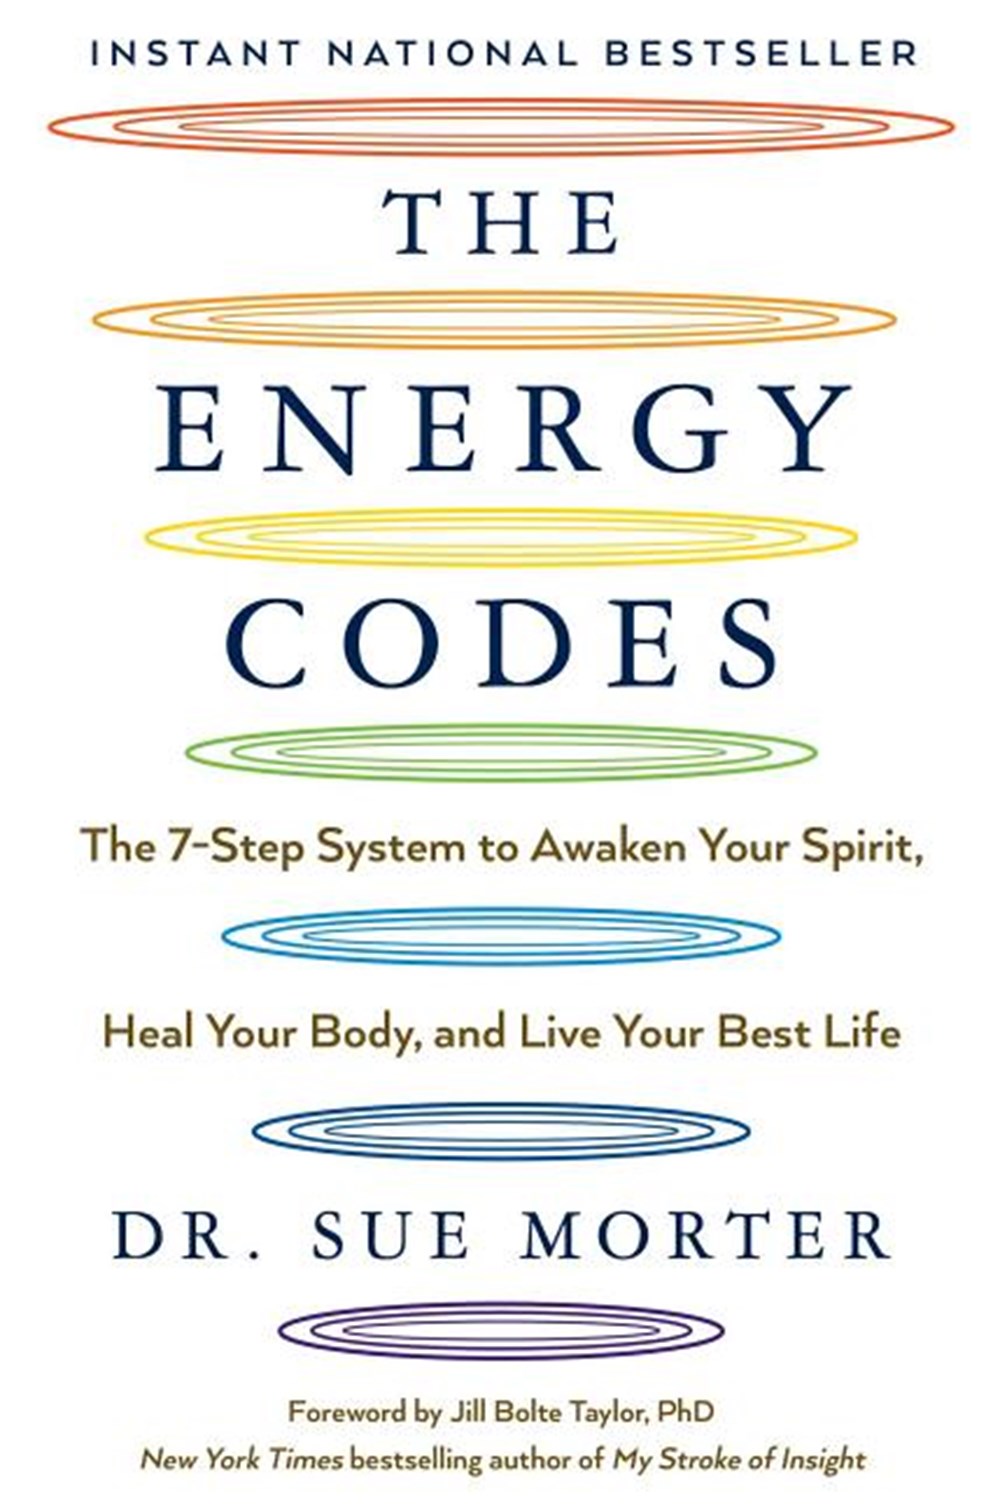 Energy Codes: The 7-Step System to Awaken Your Spirit, Heal Your Body, and Live Your Best Life